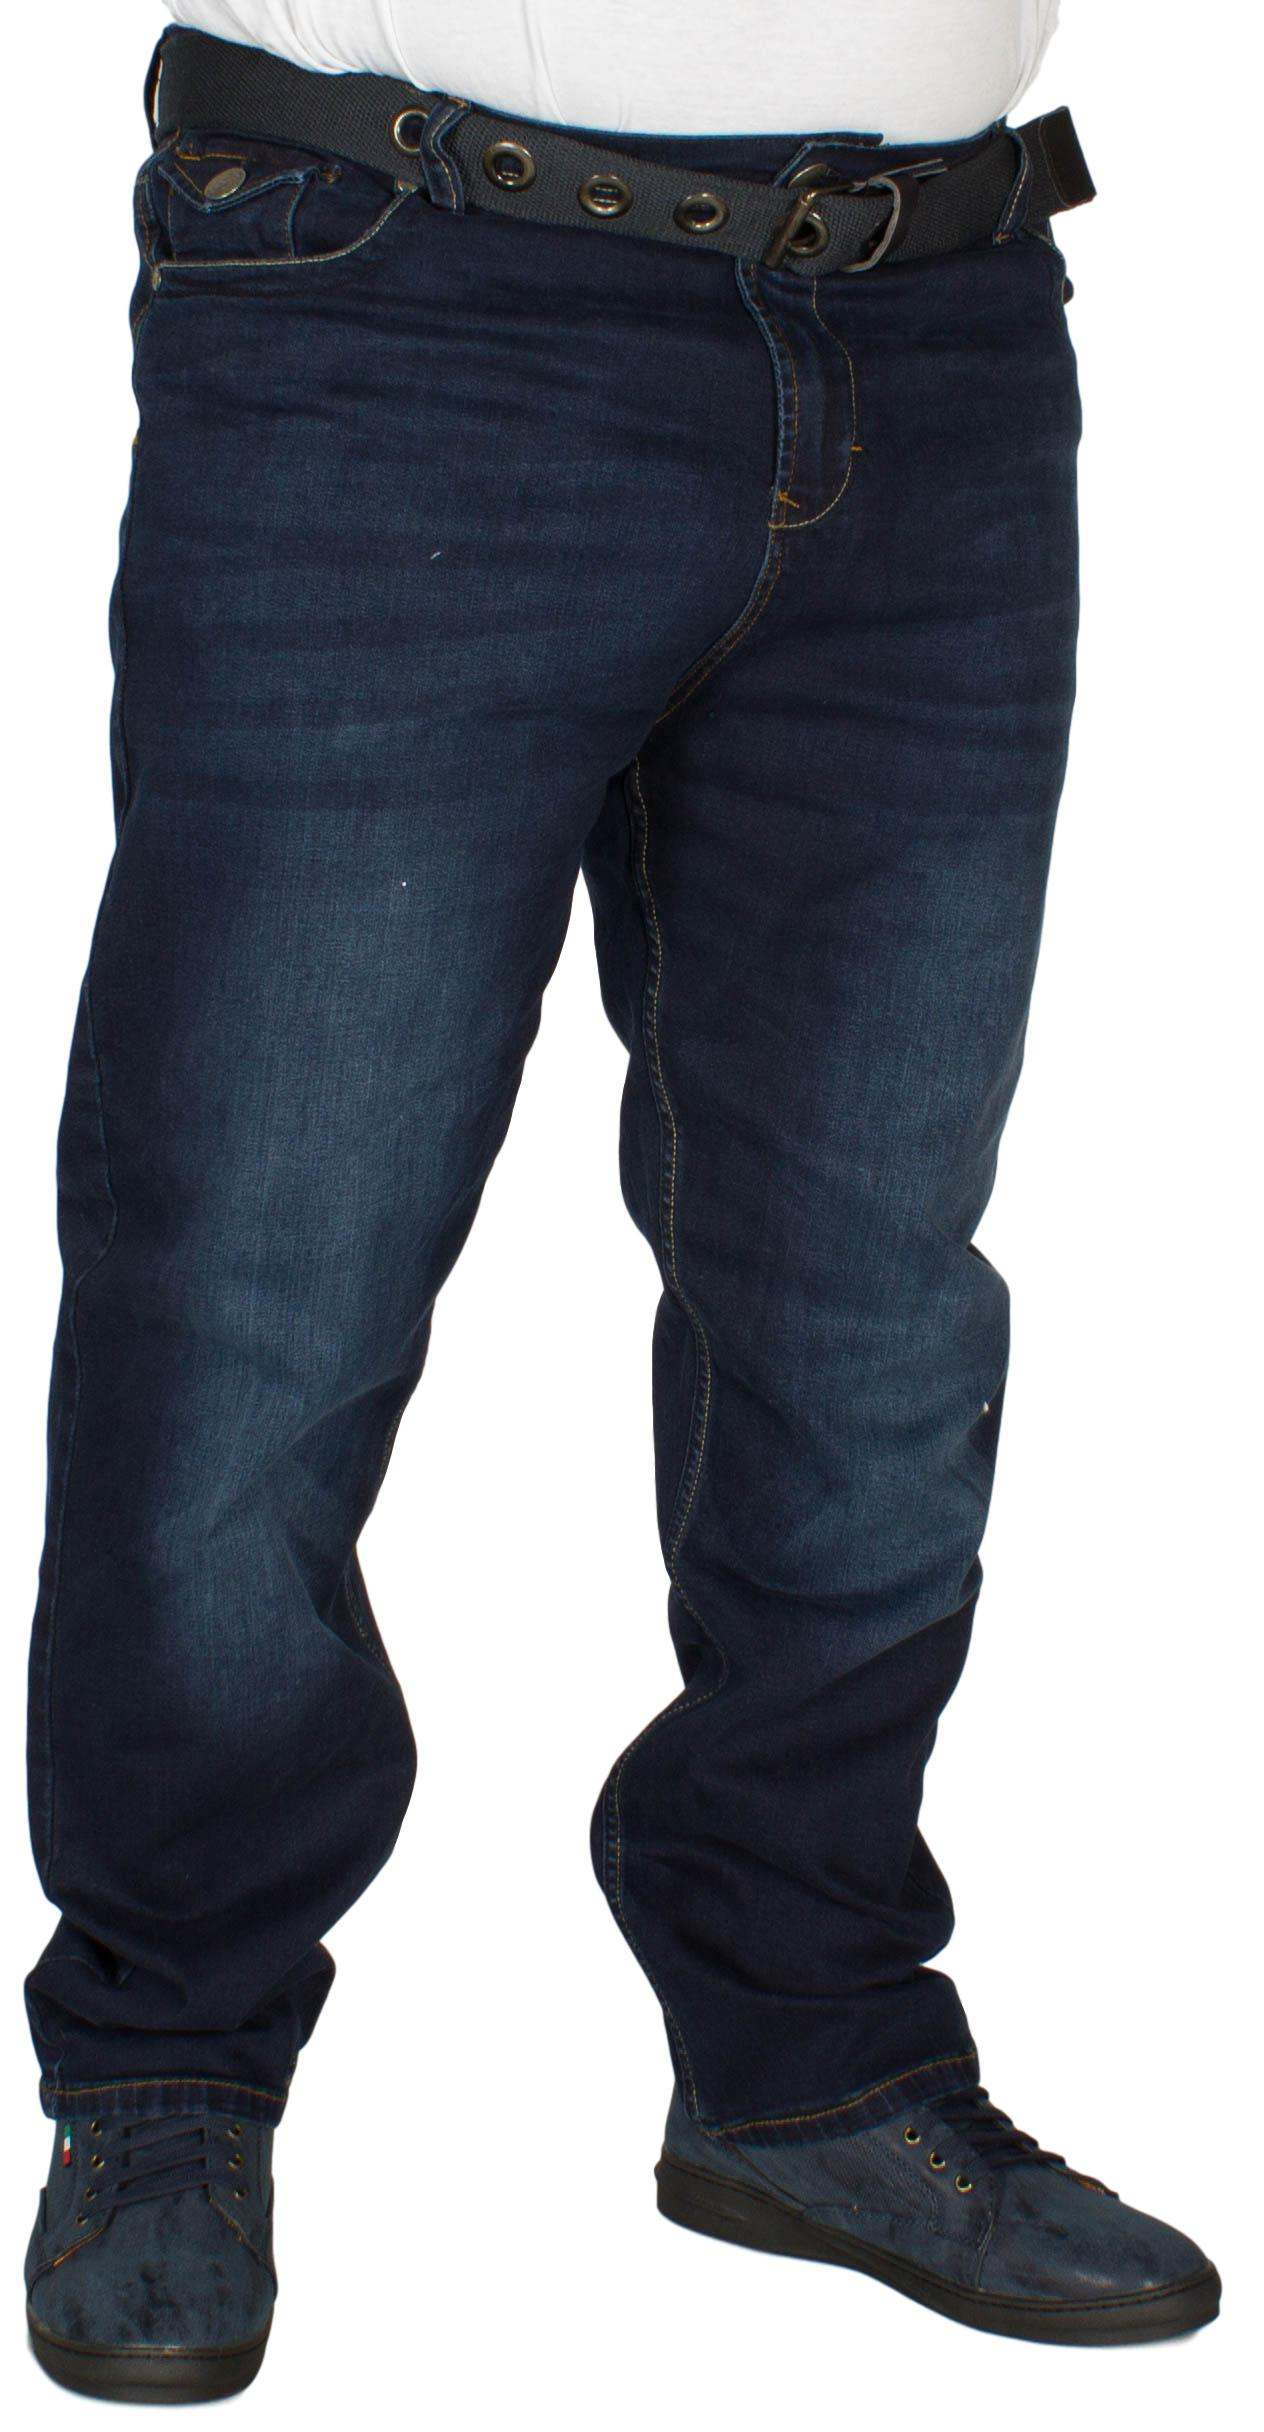 42 inch jeans online